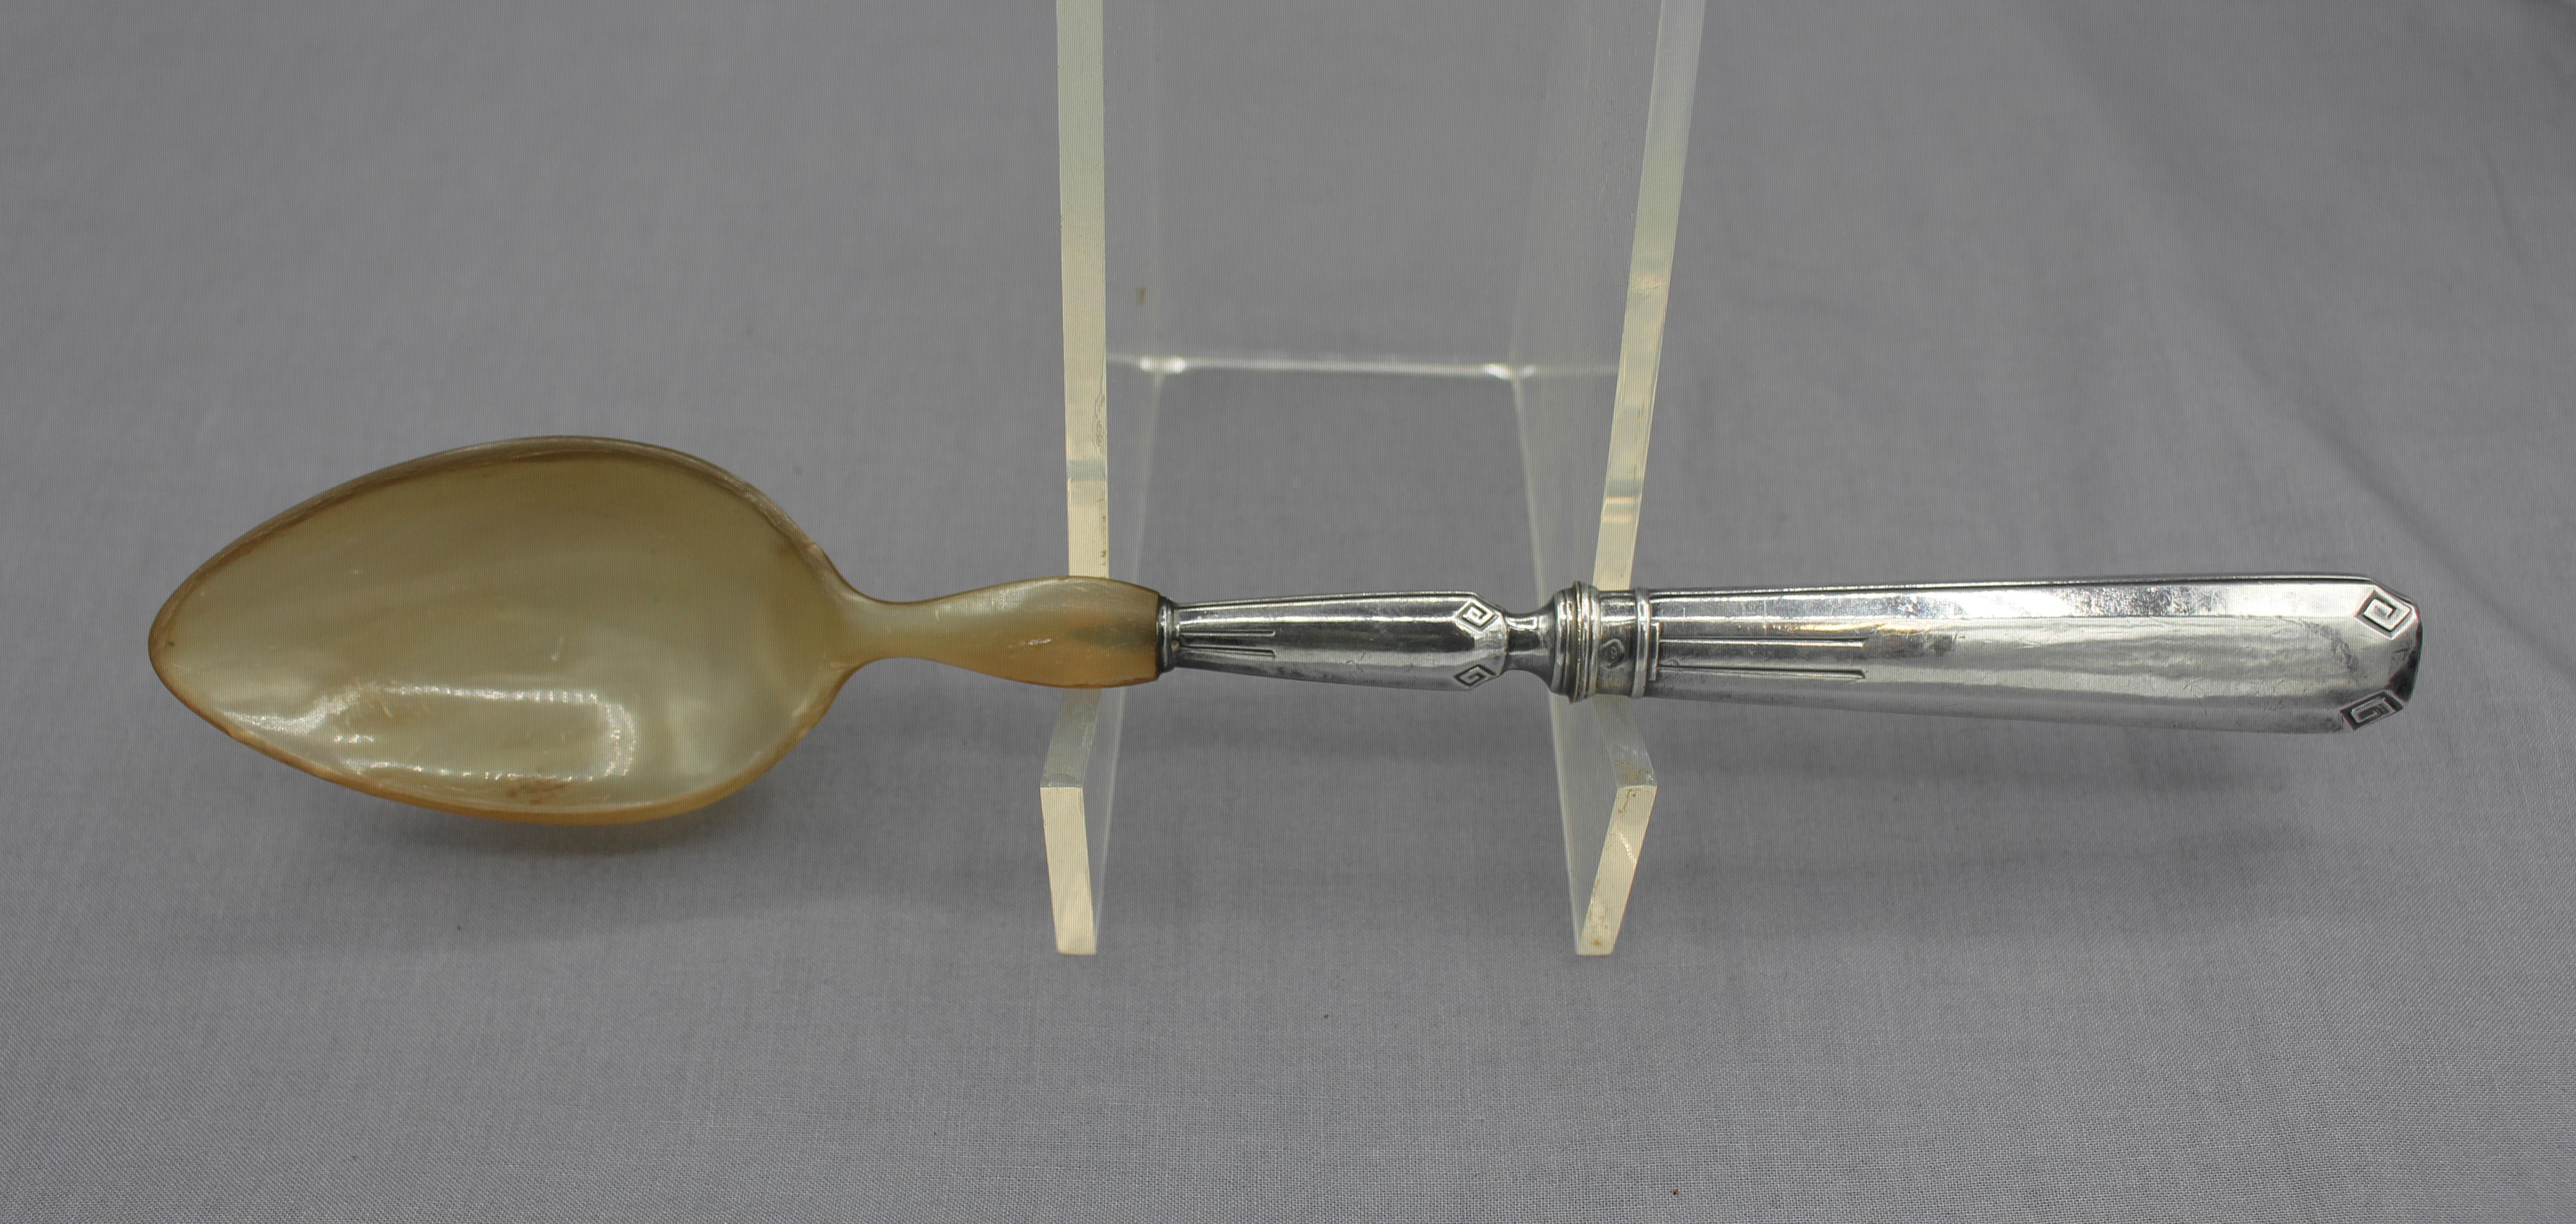 A fine pair of salad servers - French 1st standard silver & probably cow horn; c. 1870-80. Post-1838 marks. Aesthetic Movement. In associated presentation case.
Spoon: 11